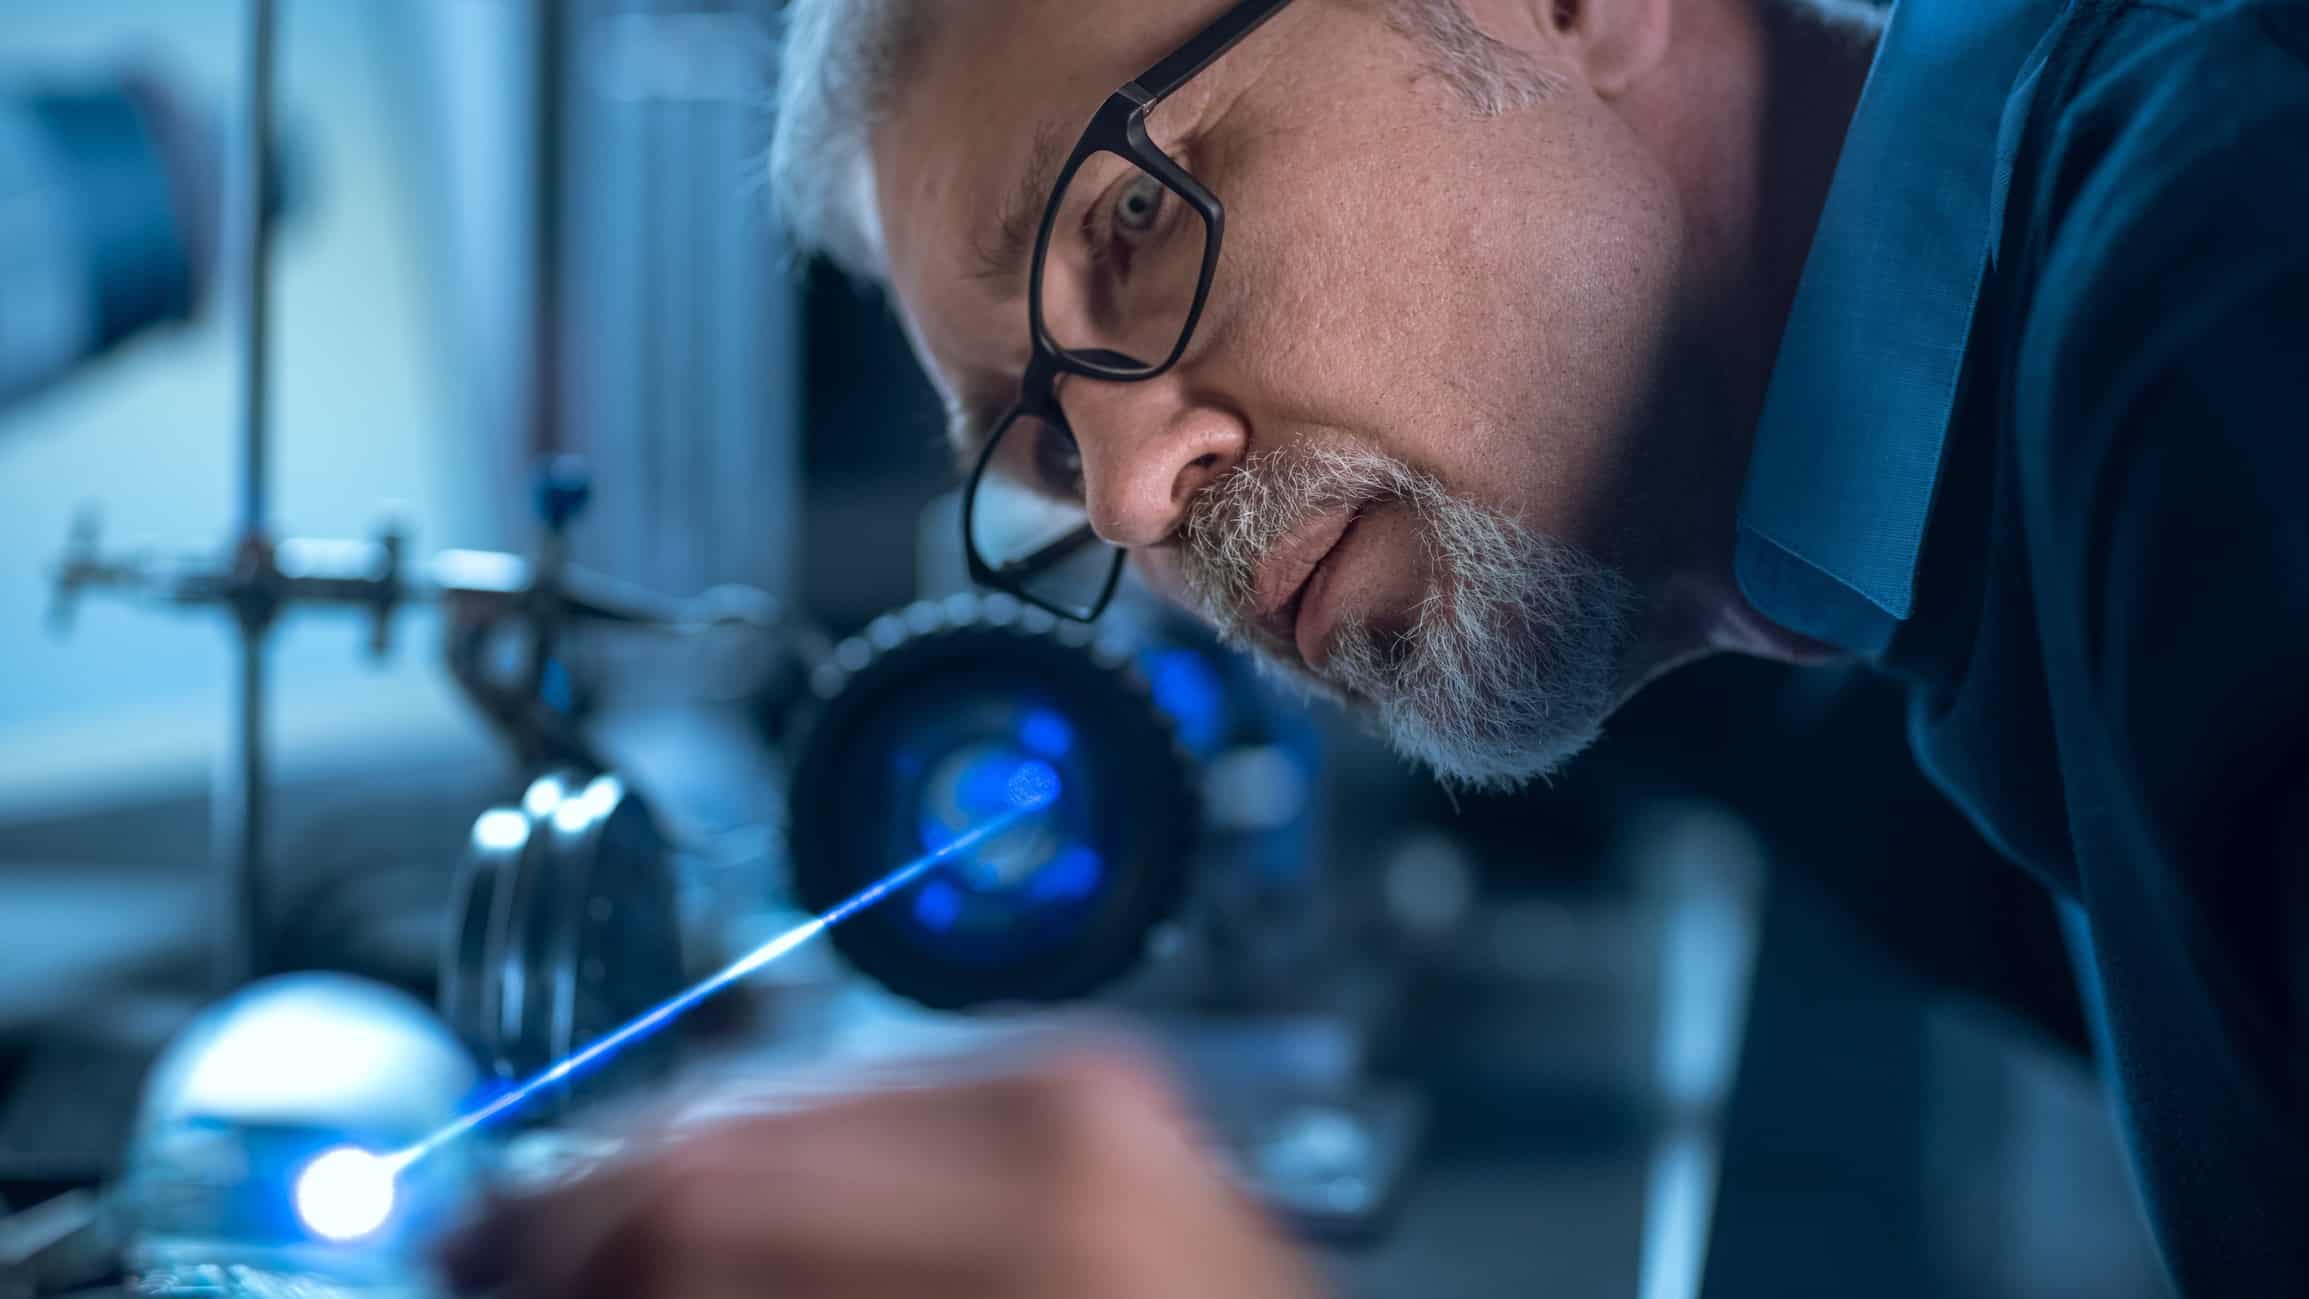 A technical manufacturer checks his work in a high-tech lab with precision equipment in the background.